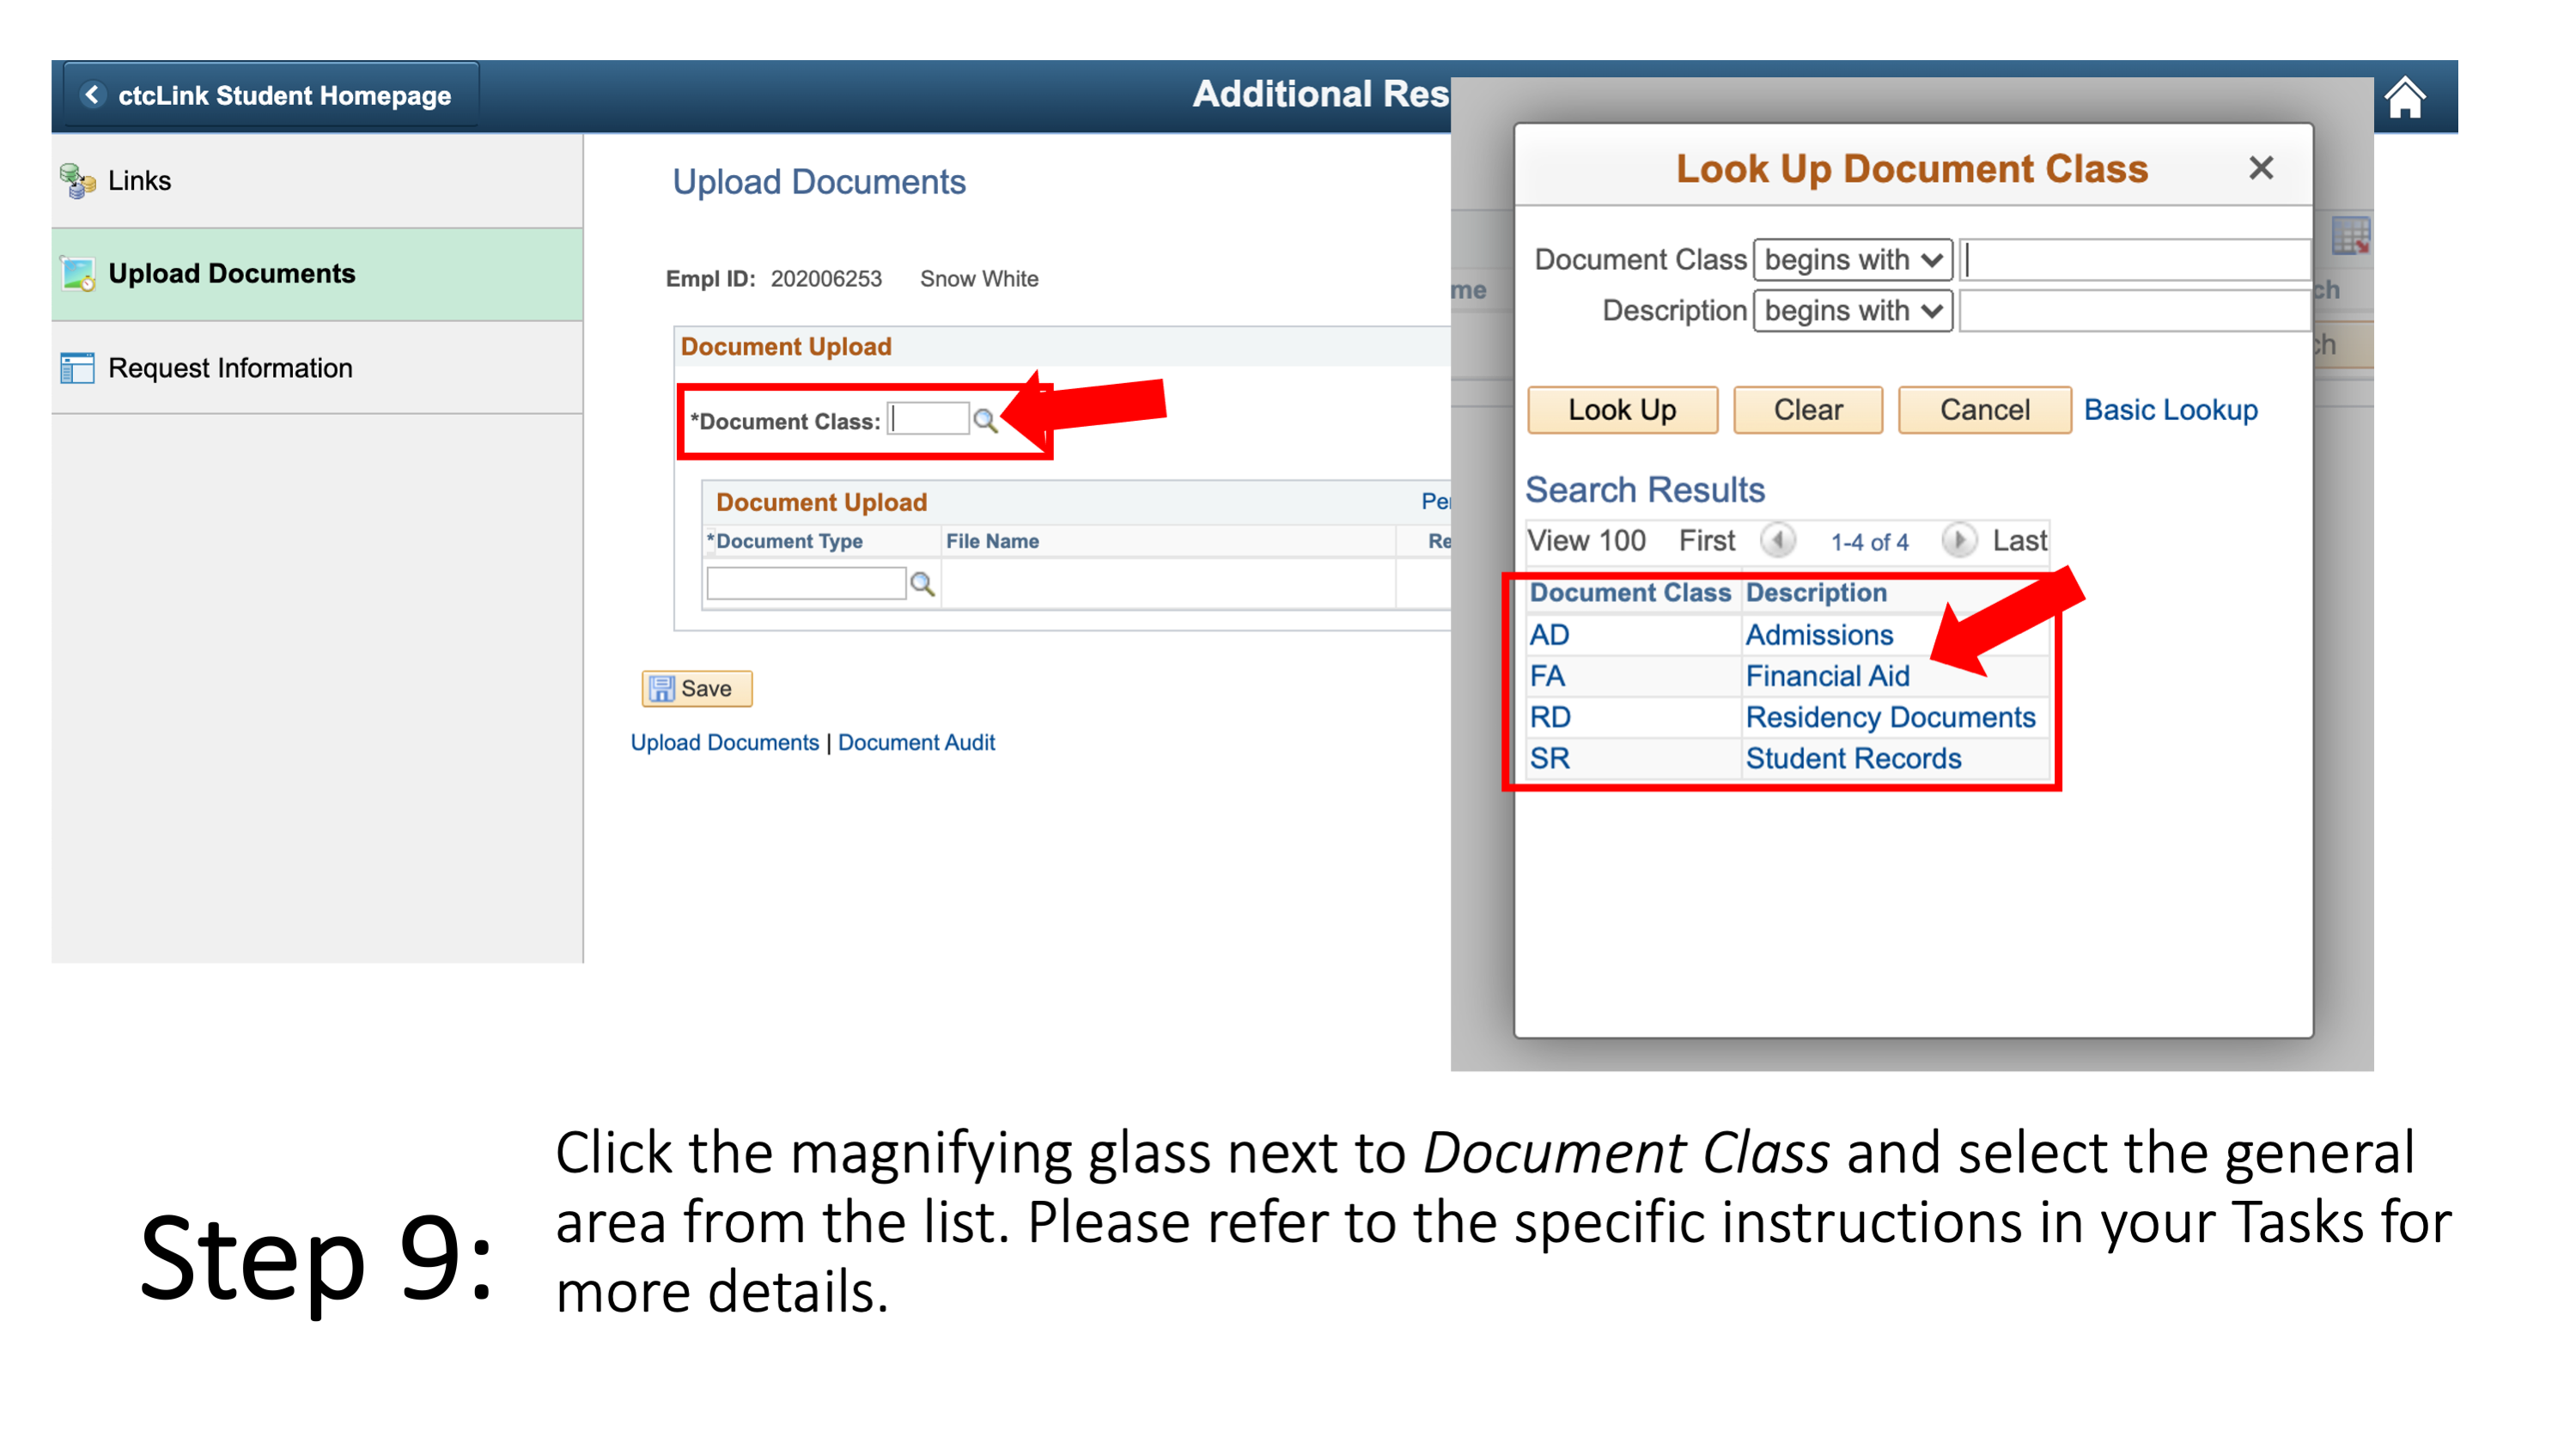 Slide 10 - Step 9: Click the magnifying glass next to Document Class and select the general area from the list. Please refer to the specific instructions in your Tasks for more details 